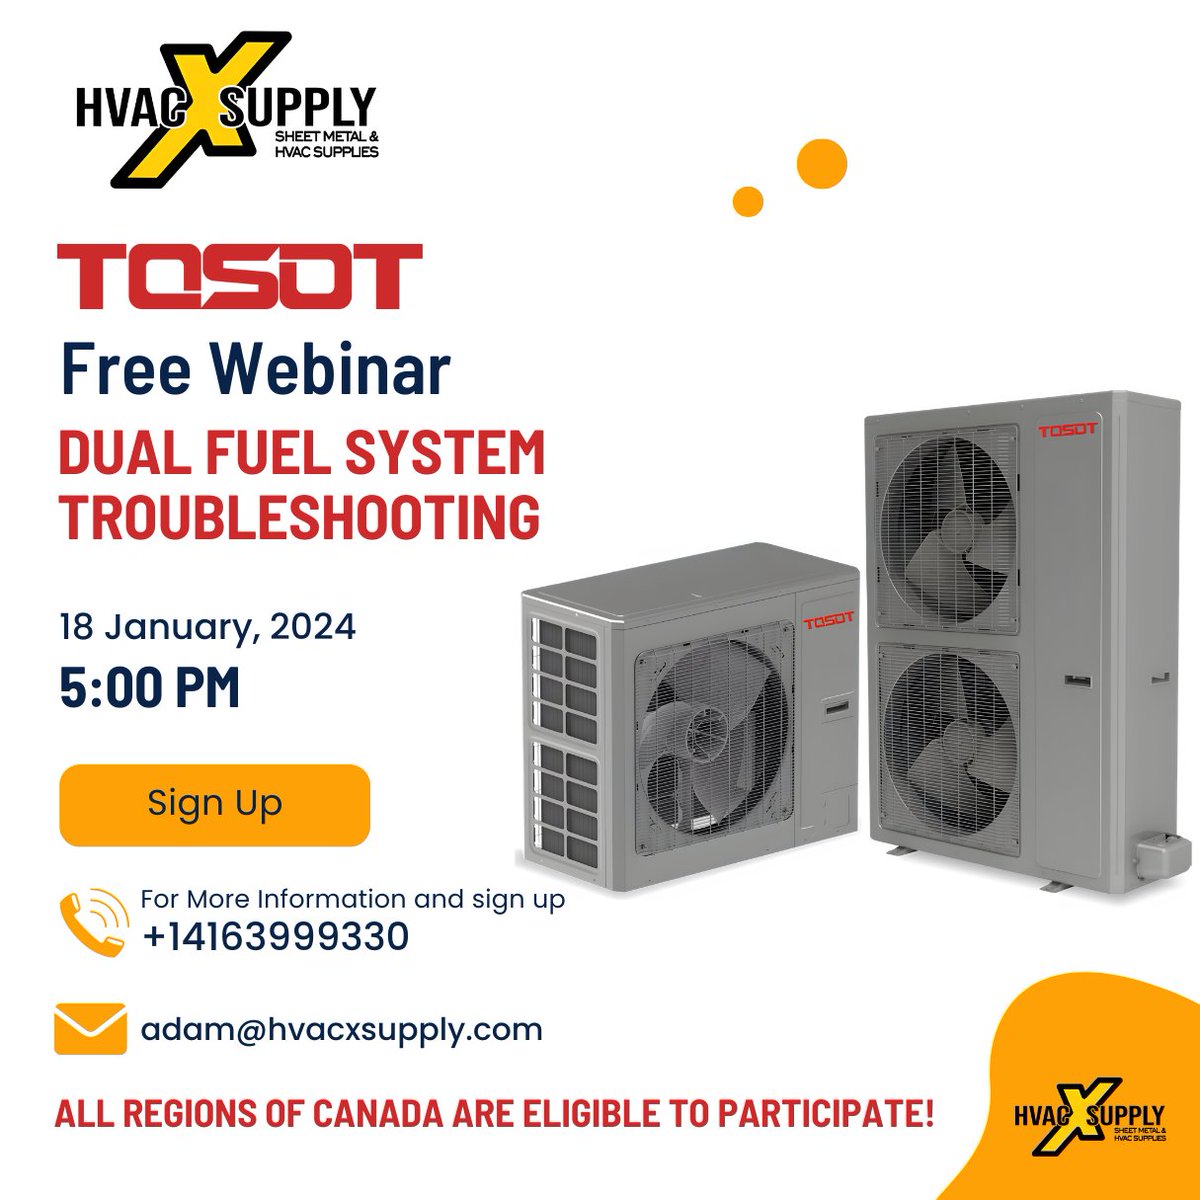 Gear up, #HVACPros! 🔩 Join our FREE #TOSOT Webinar on Dual Fuel System Troubleshooting 🛠️🌡️

📆 Jan 18 '24 | 🕔 5 PM EST| 🍁 All over Canada 📞+14163999330 | ✉️ adam@hvacxsupply.com to register!
Reserve your spot NOW! #HVACTraining #CanadaHVAC #TOSOTCanada